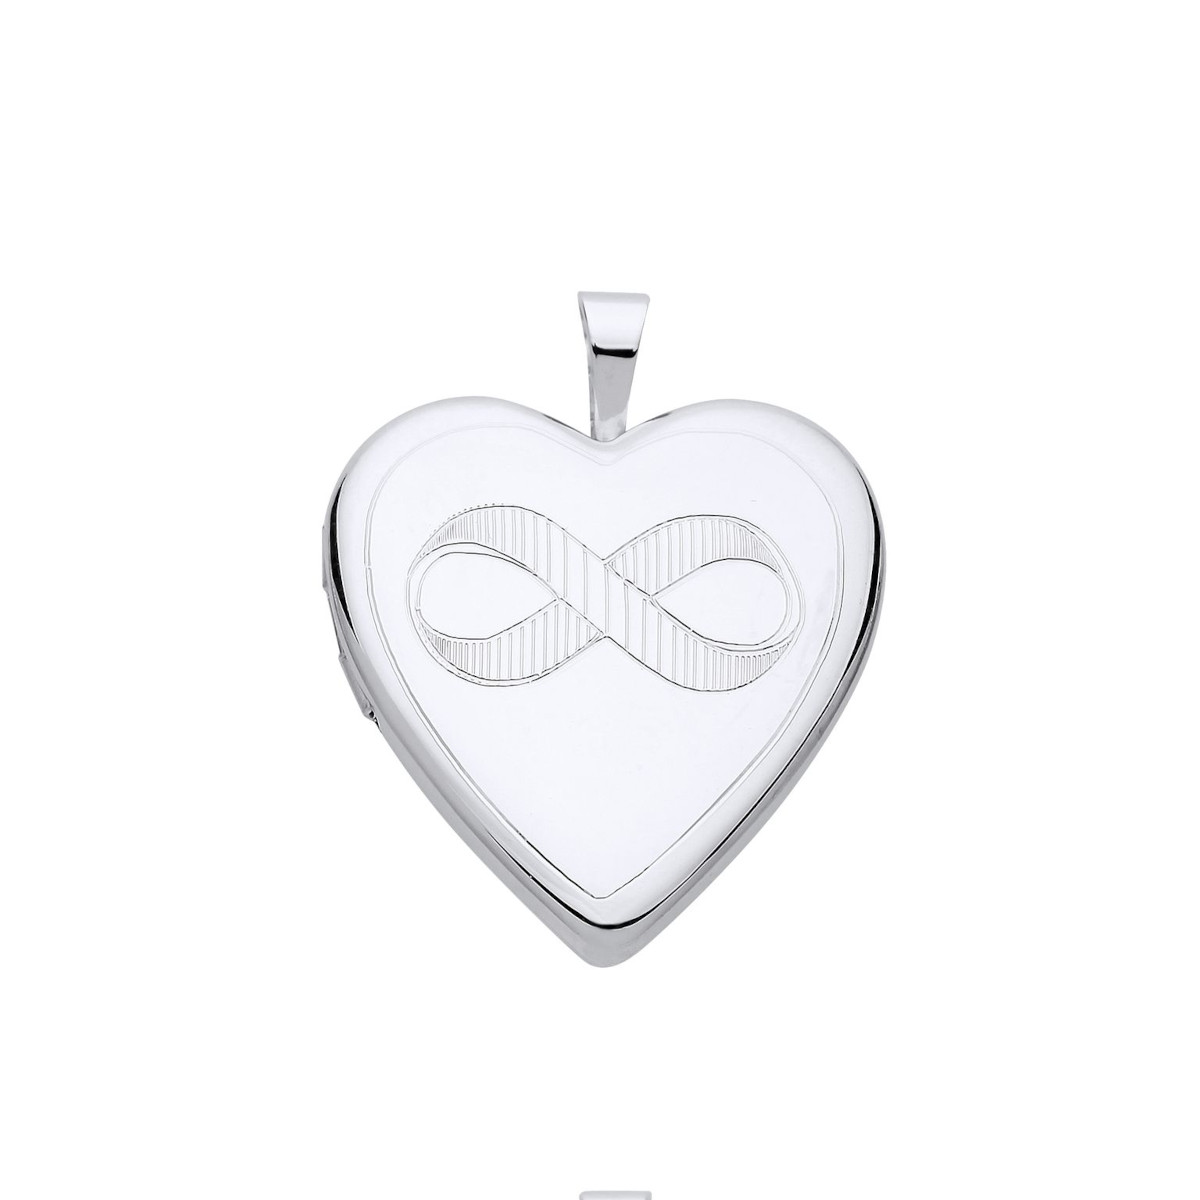 silver heart shaped locket with infinity symbol engraving